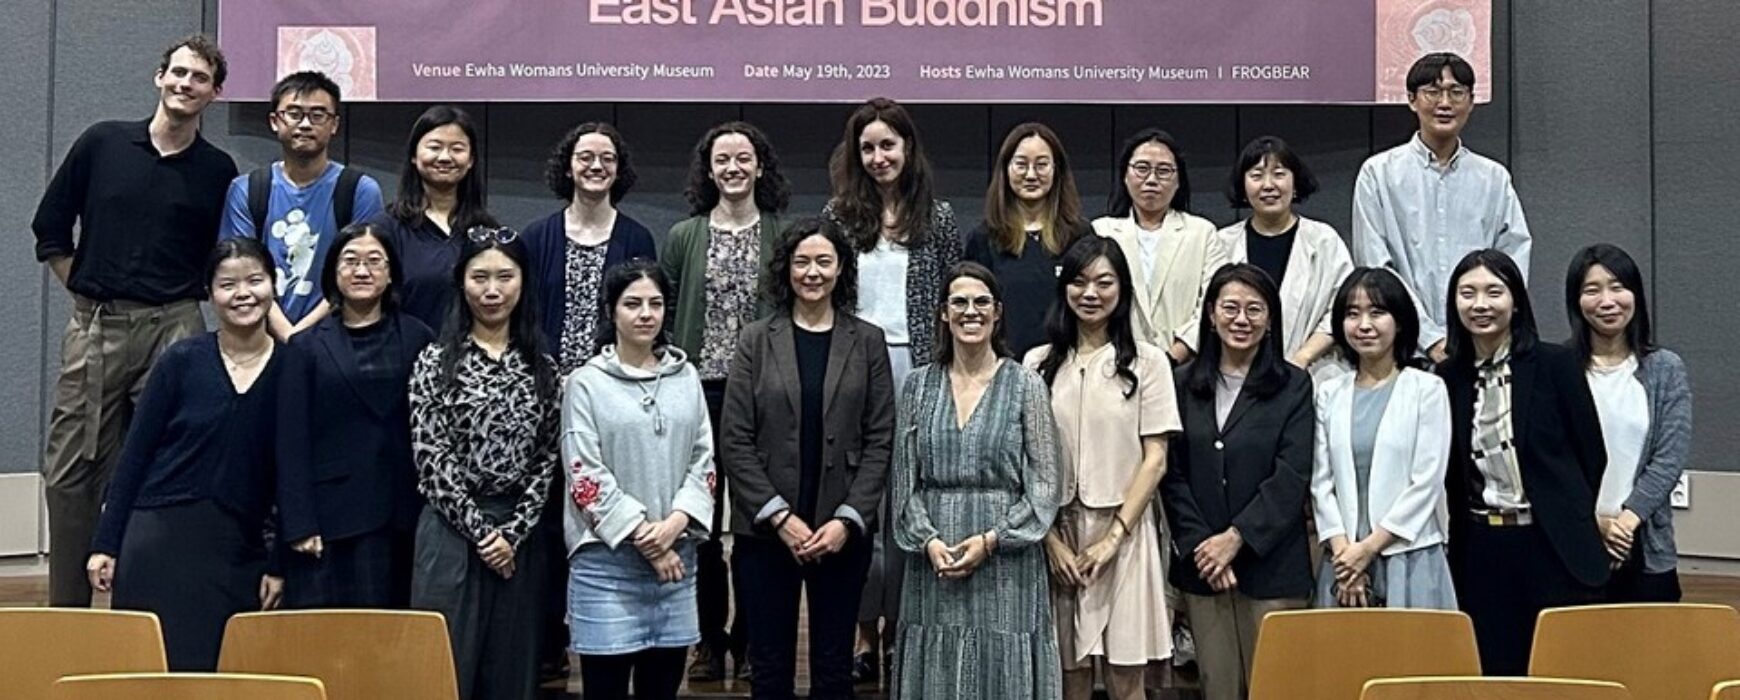 Market, Merit, and Women in East Asian Buddhism – Conference Report